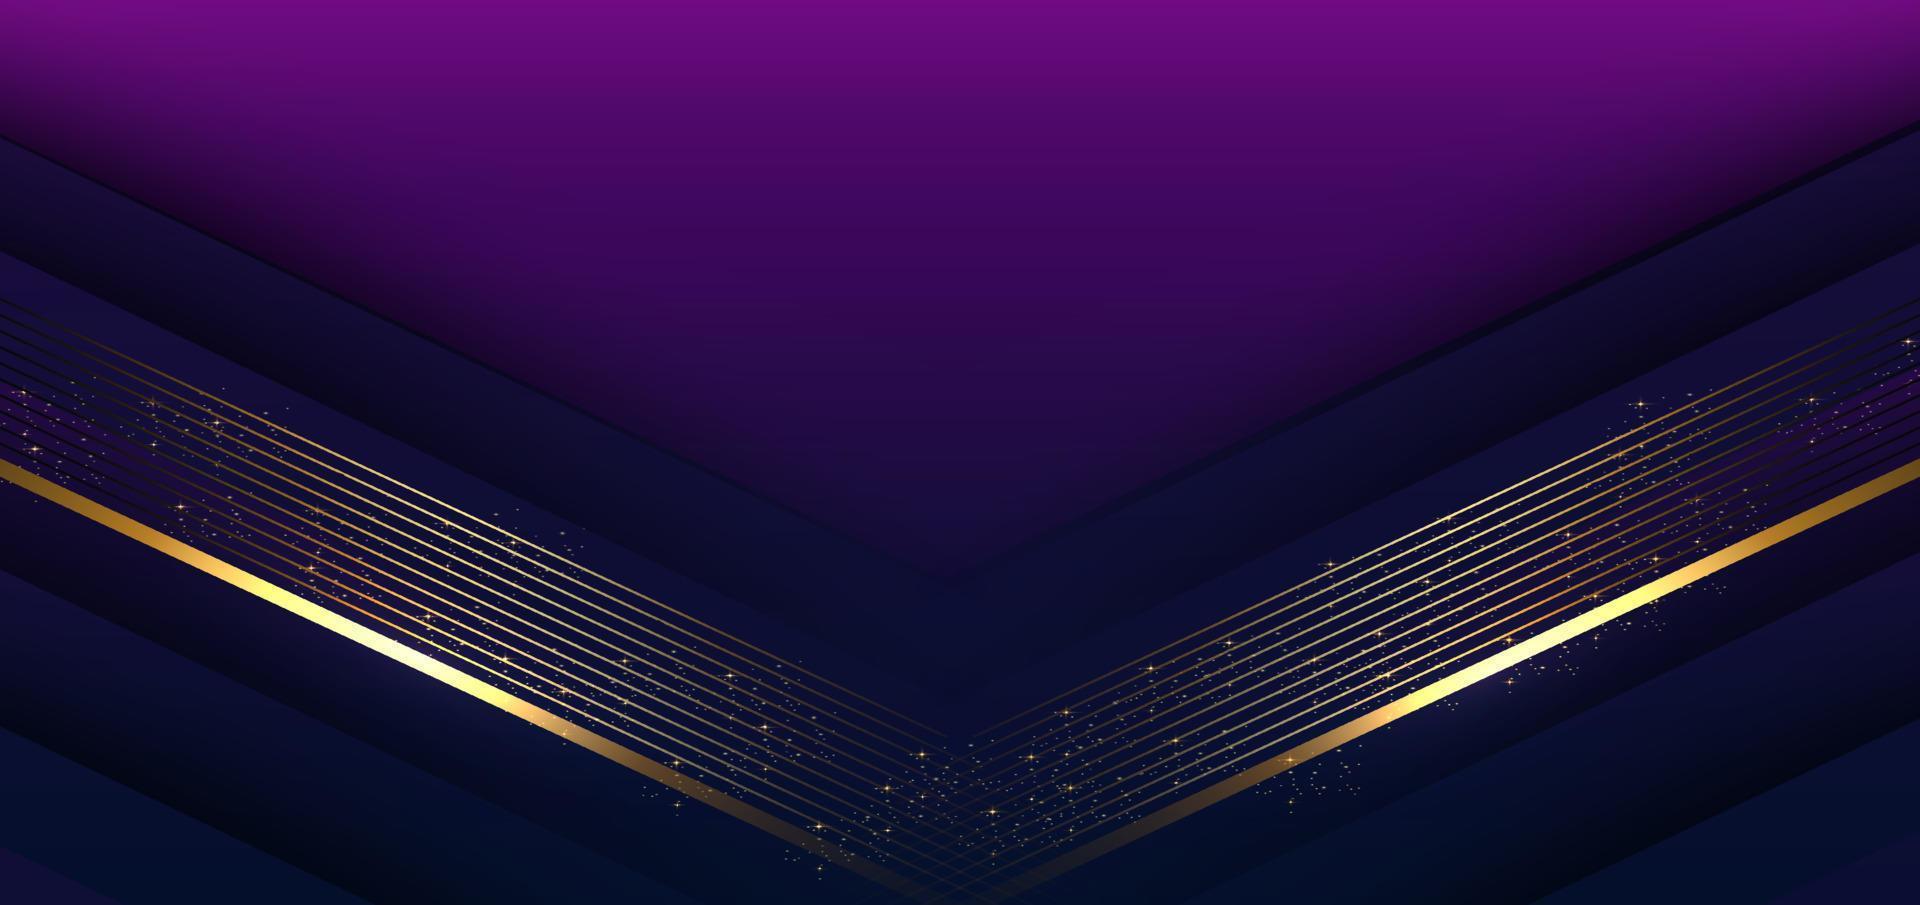 Template triangles purple and dark blue geometric with golden line layer and lighting effect sparkle on dark blue background. Luxury style. vector